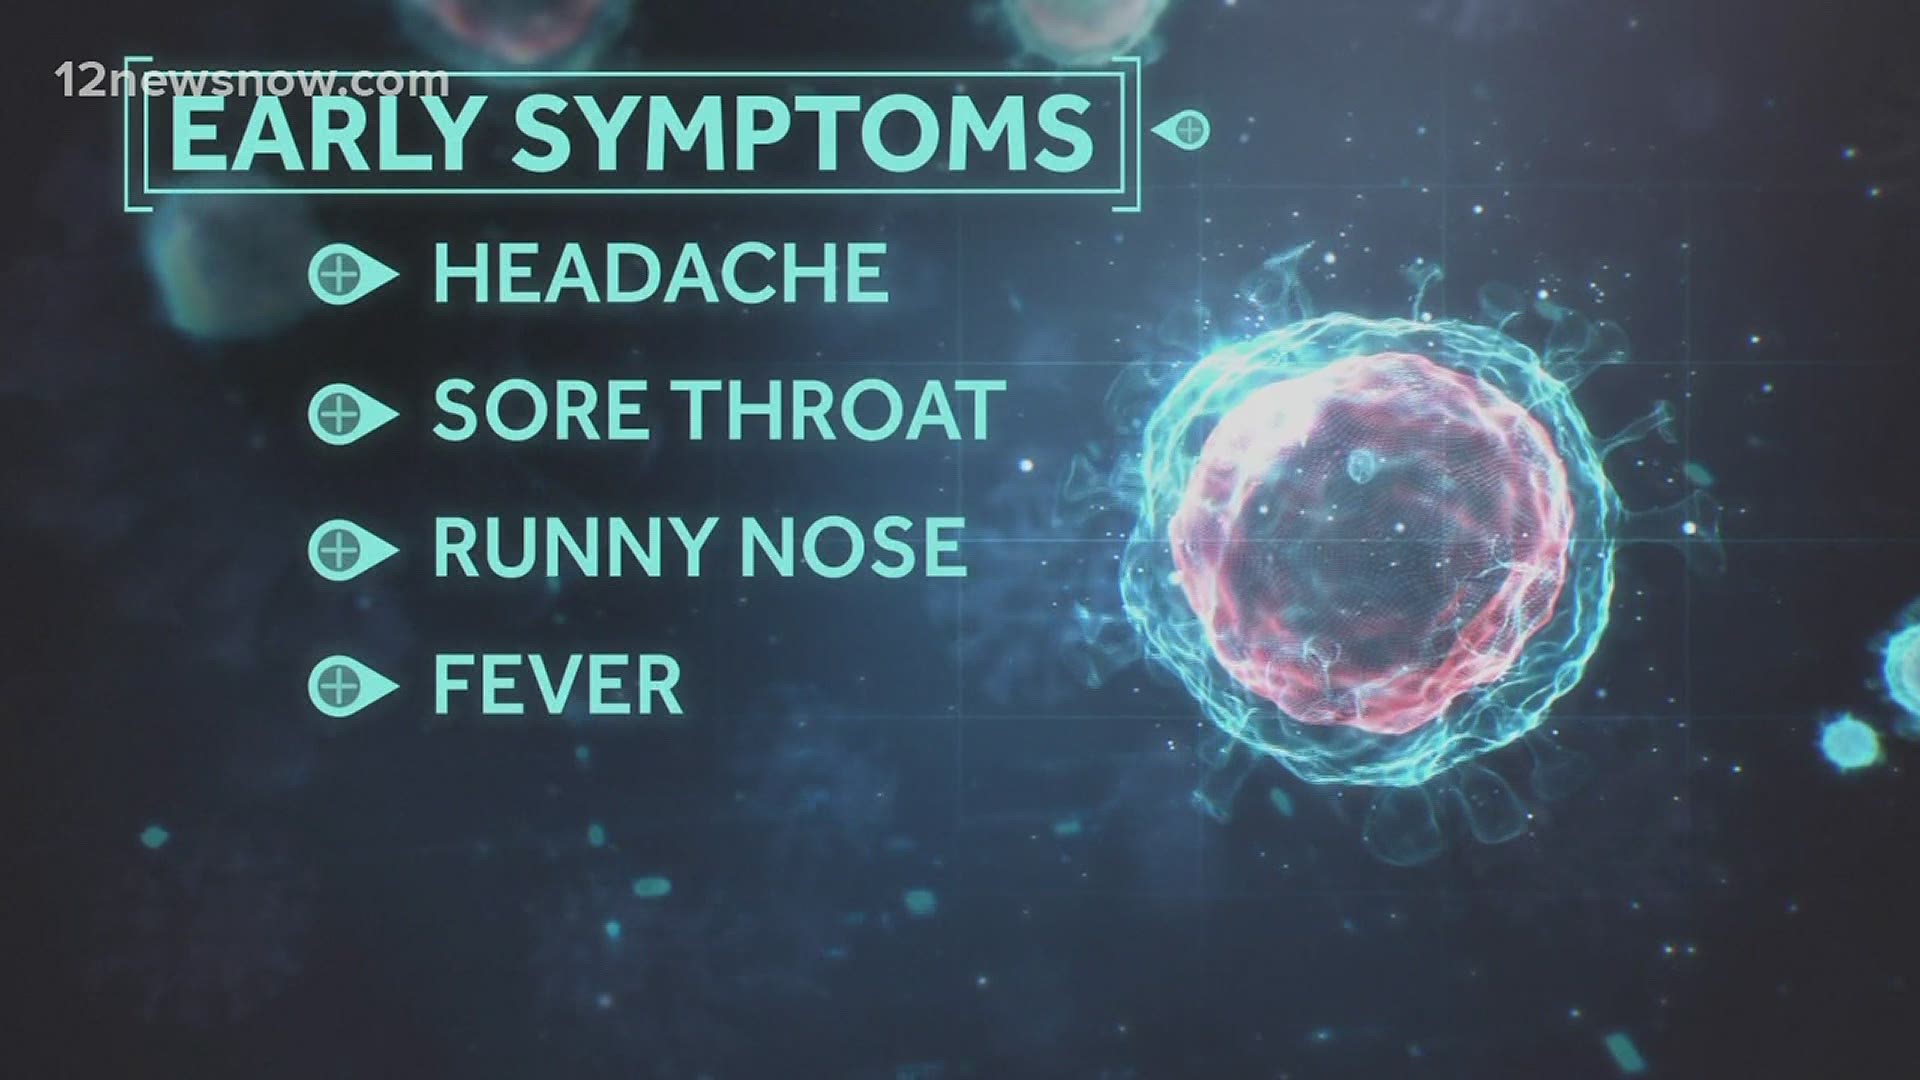 Facts not Fear: COVID 19. In younger population, the new Delta variant can be confused for the common cold with symptoms like headache, sore throat, and runny nose.